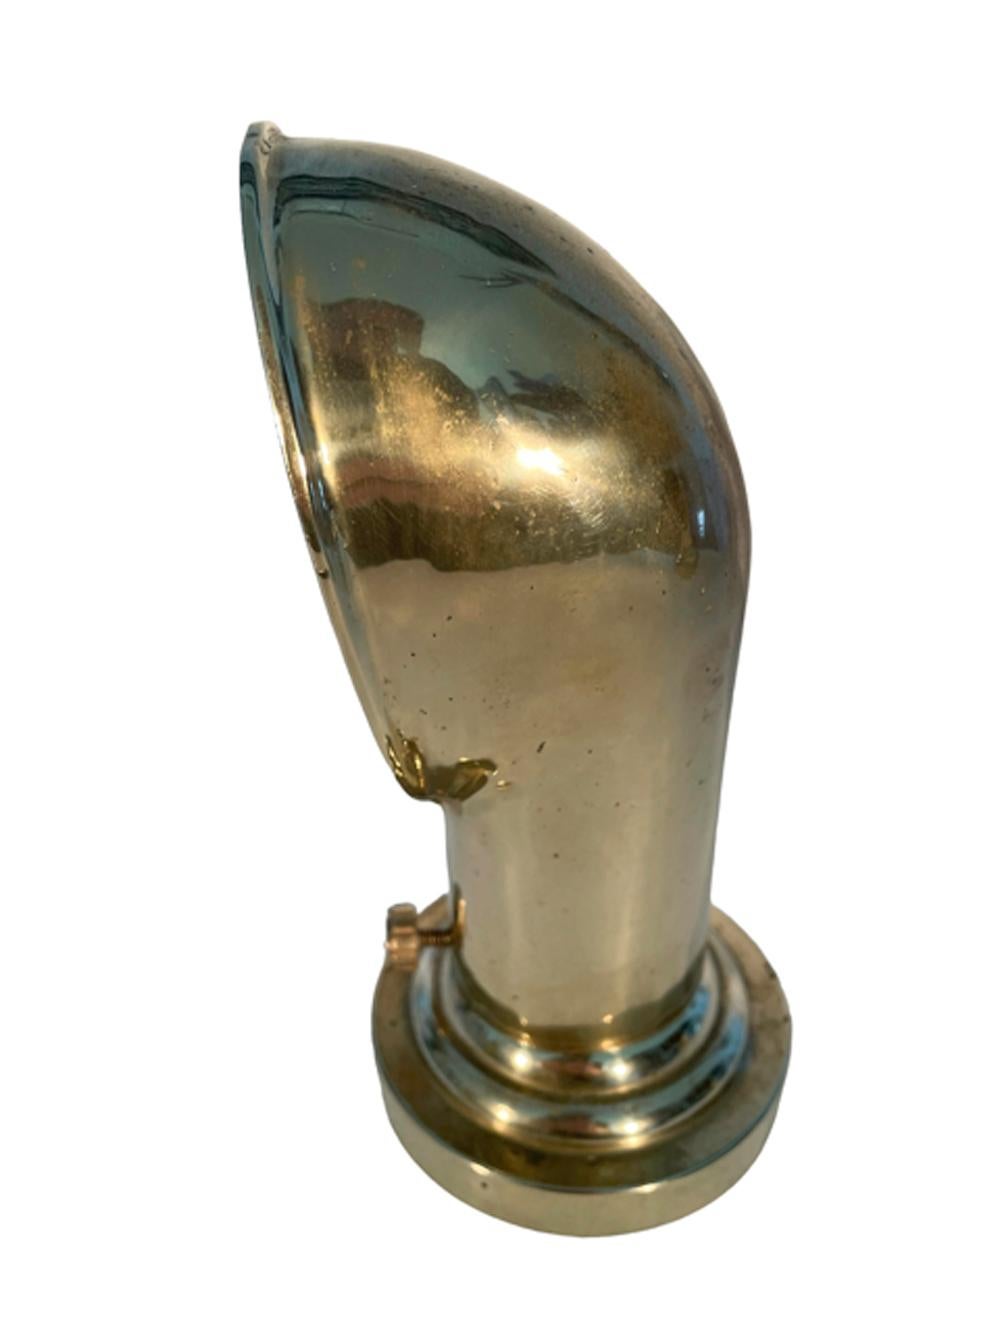 Midcentury sand-cast brass, nautical theme ashtray with a single cigar / cigarette rest in the form of a ships cowl vent, the stepped base can be removed for emptying and cleaning.